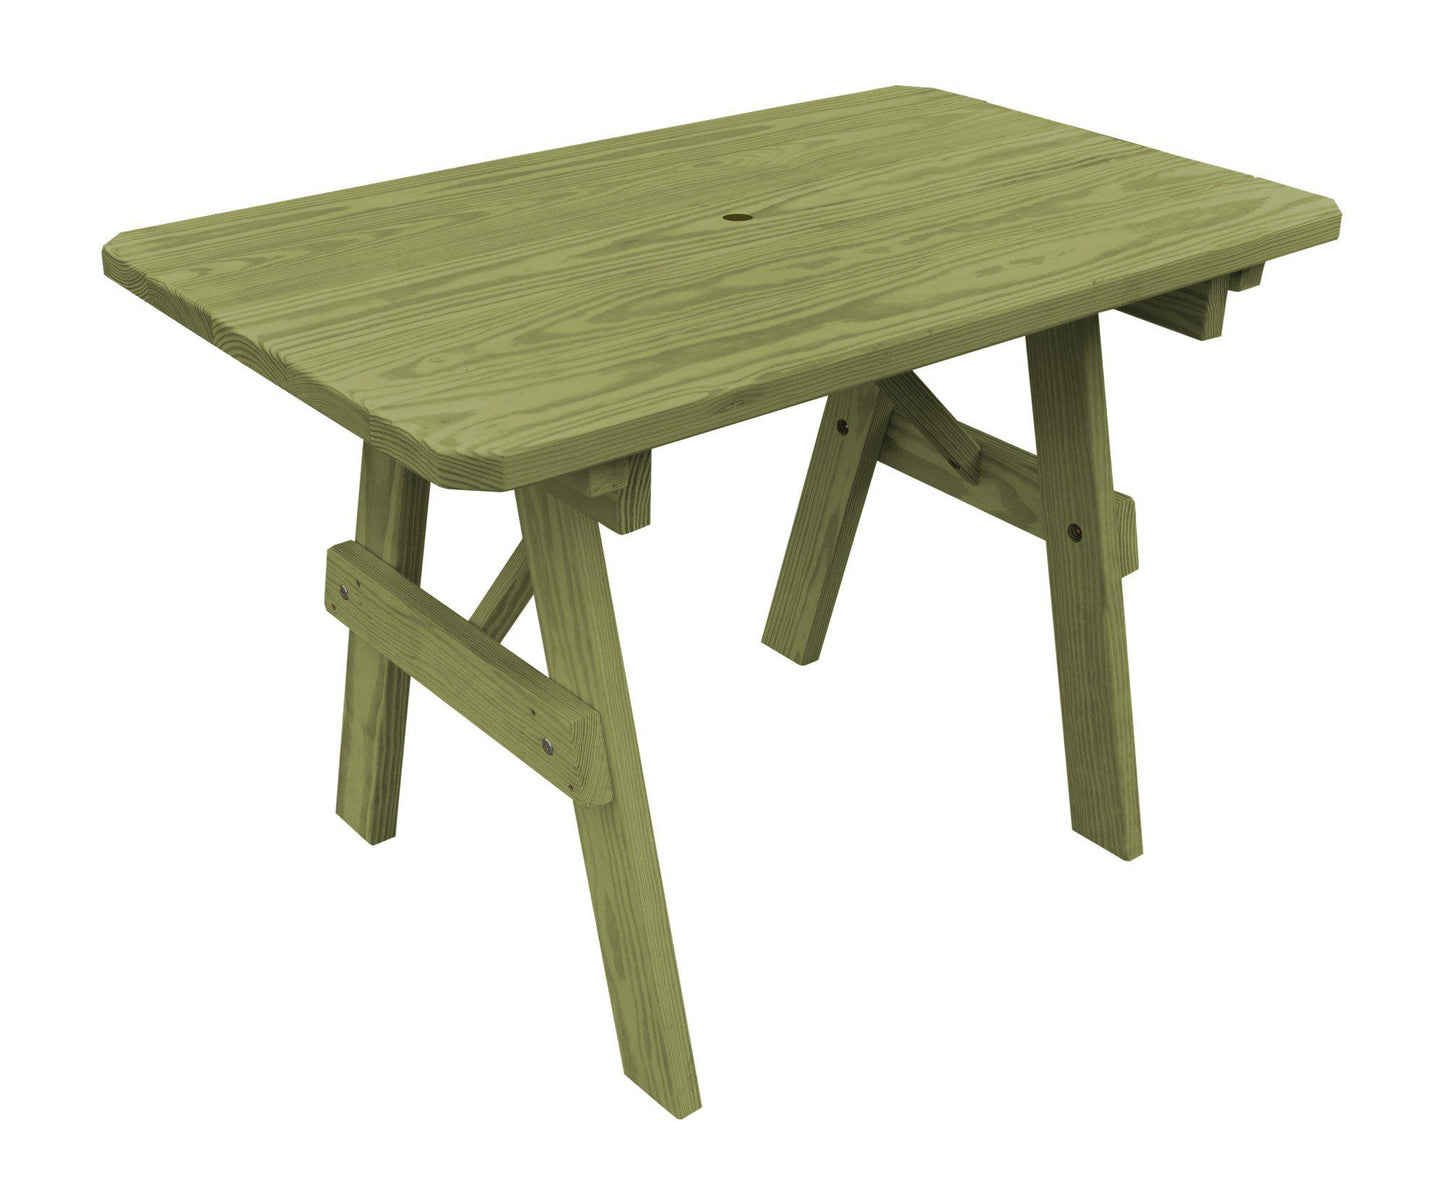 A&L Furniture Co. Yellow Pine 4' Traditional Table Only - Specify for Umbrella Hole - LEAD TIME TO SHIP 10 BUSINESS DAYS